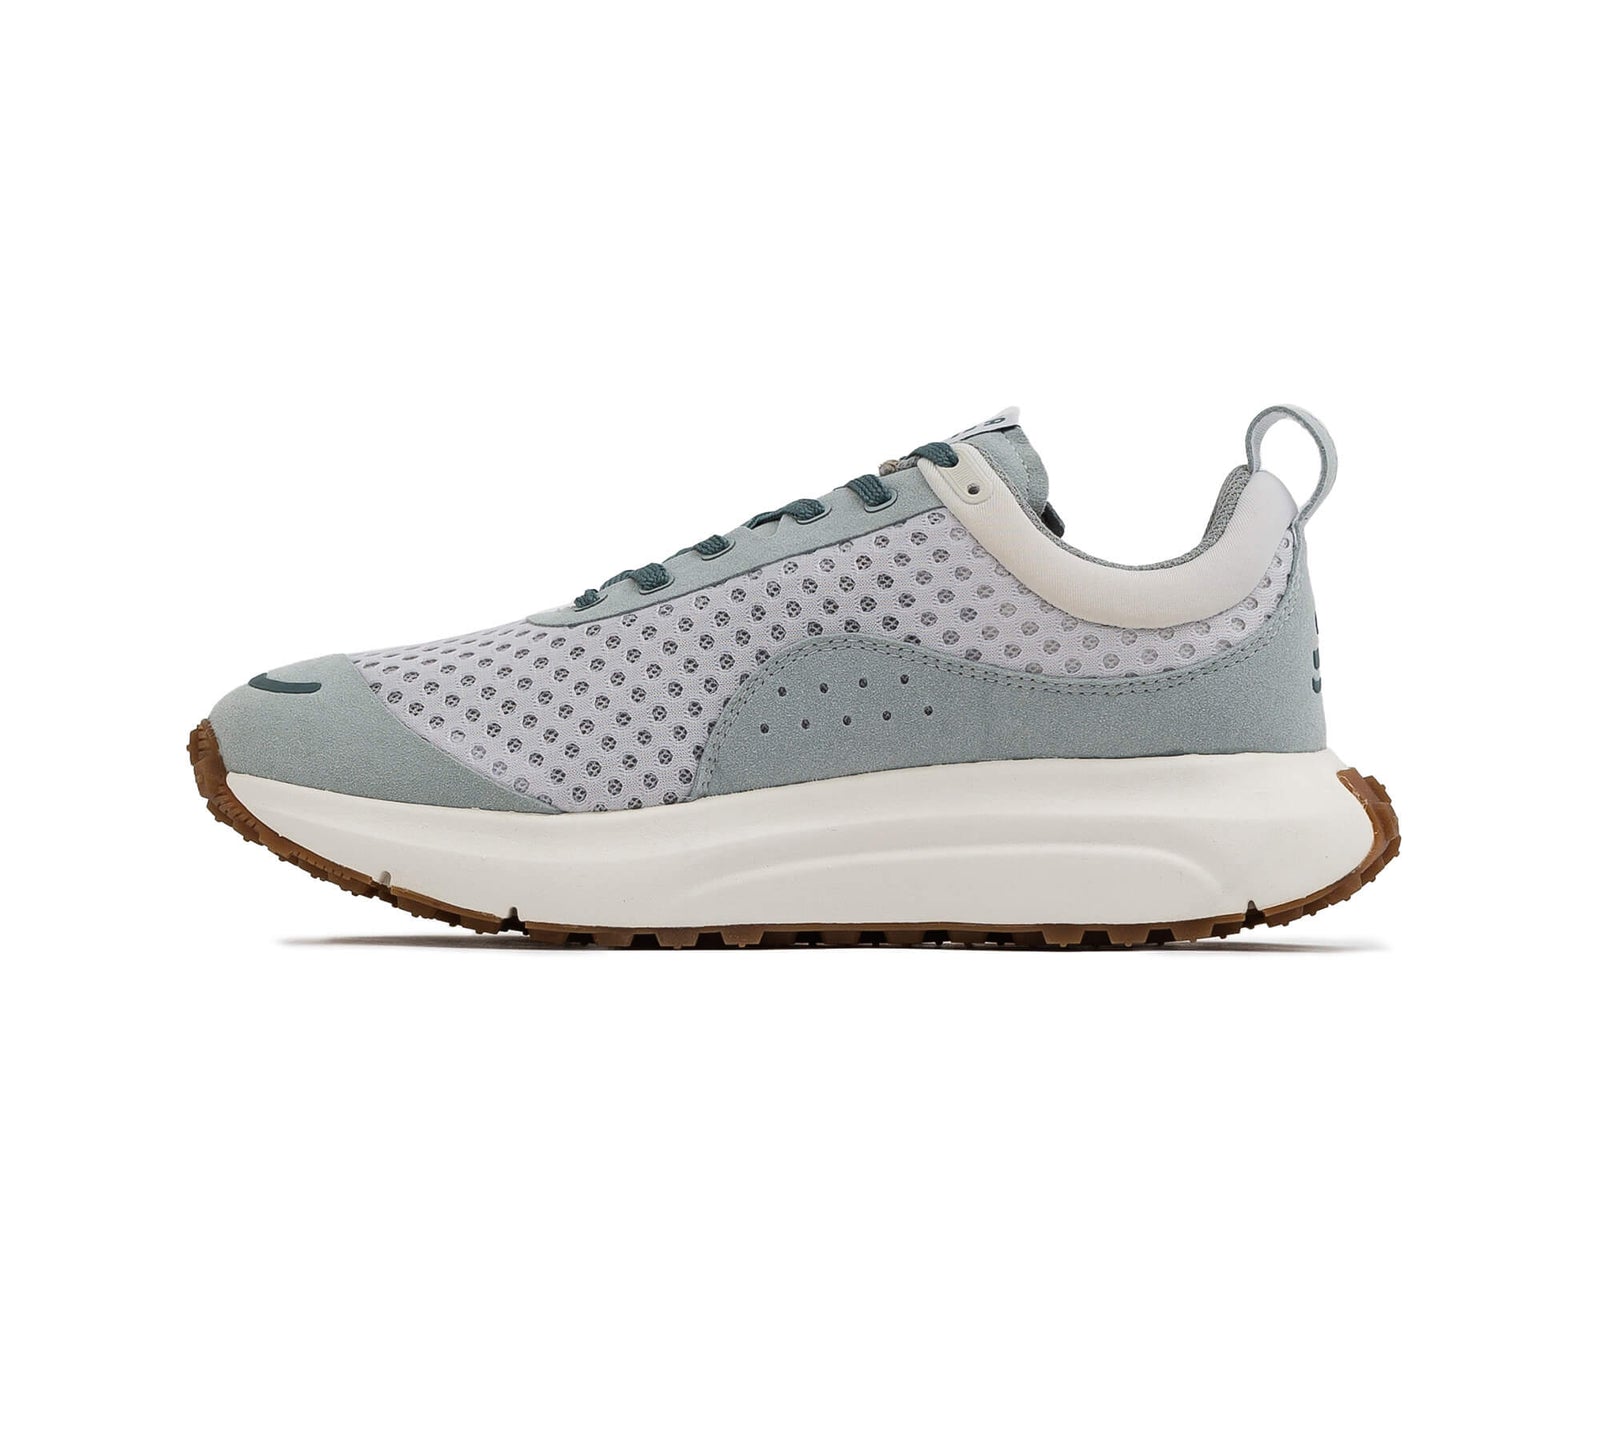 Interior side view of the right Everywhere Hilma Running Shoe in Mirage Grey